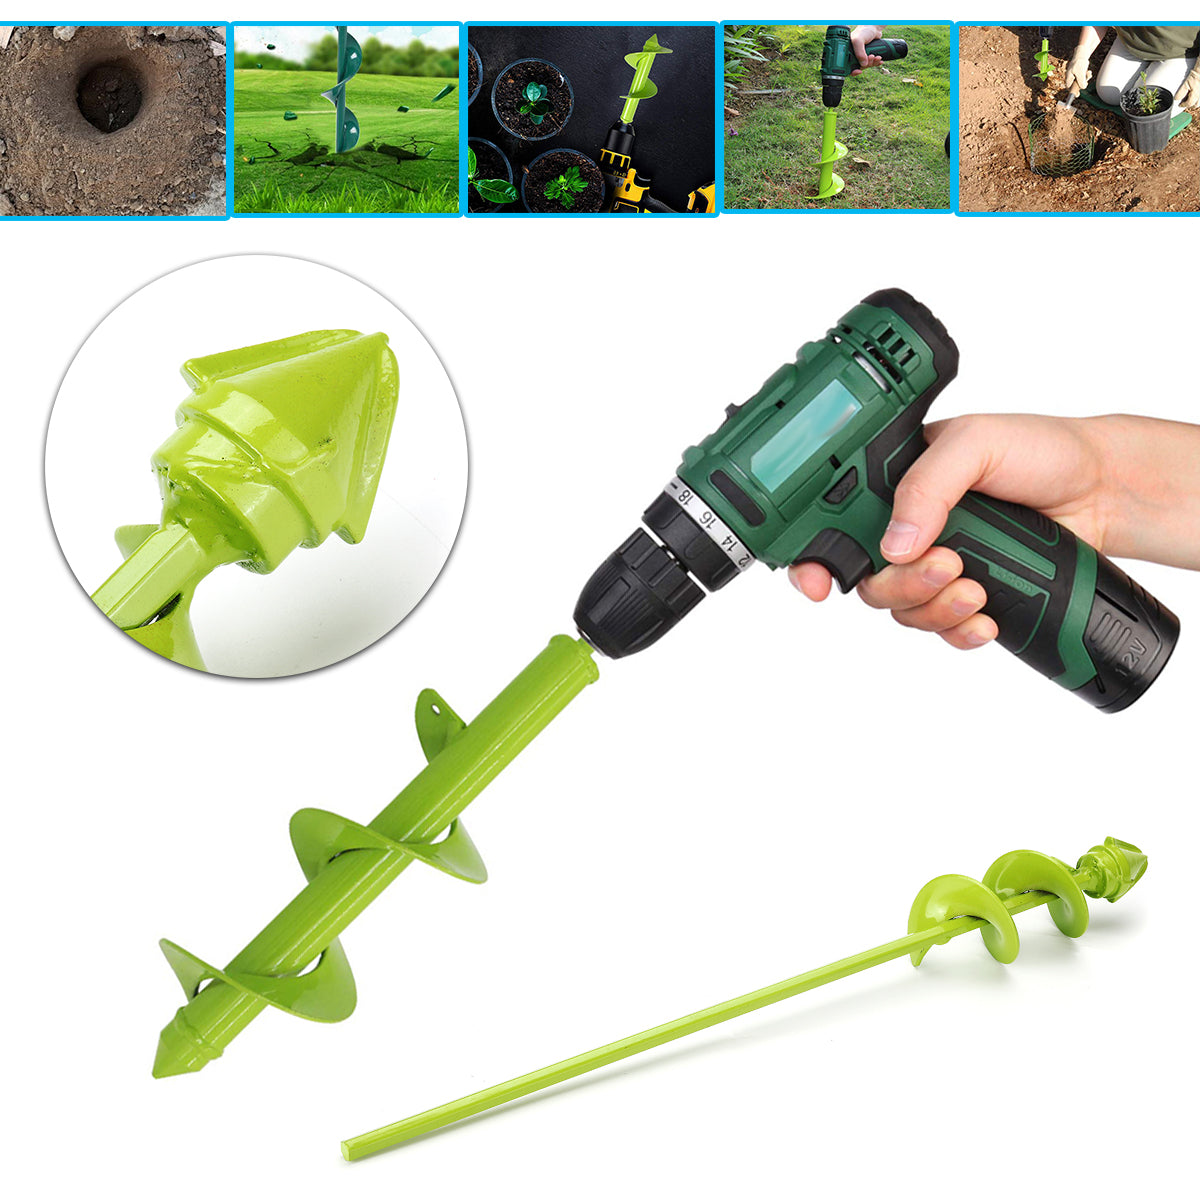 Electric Power Garden Auger Drill Bits Earth Planter Spiral Post Hole Digger Kit